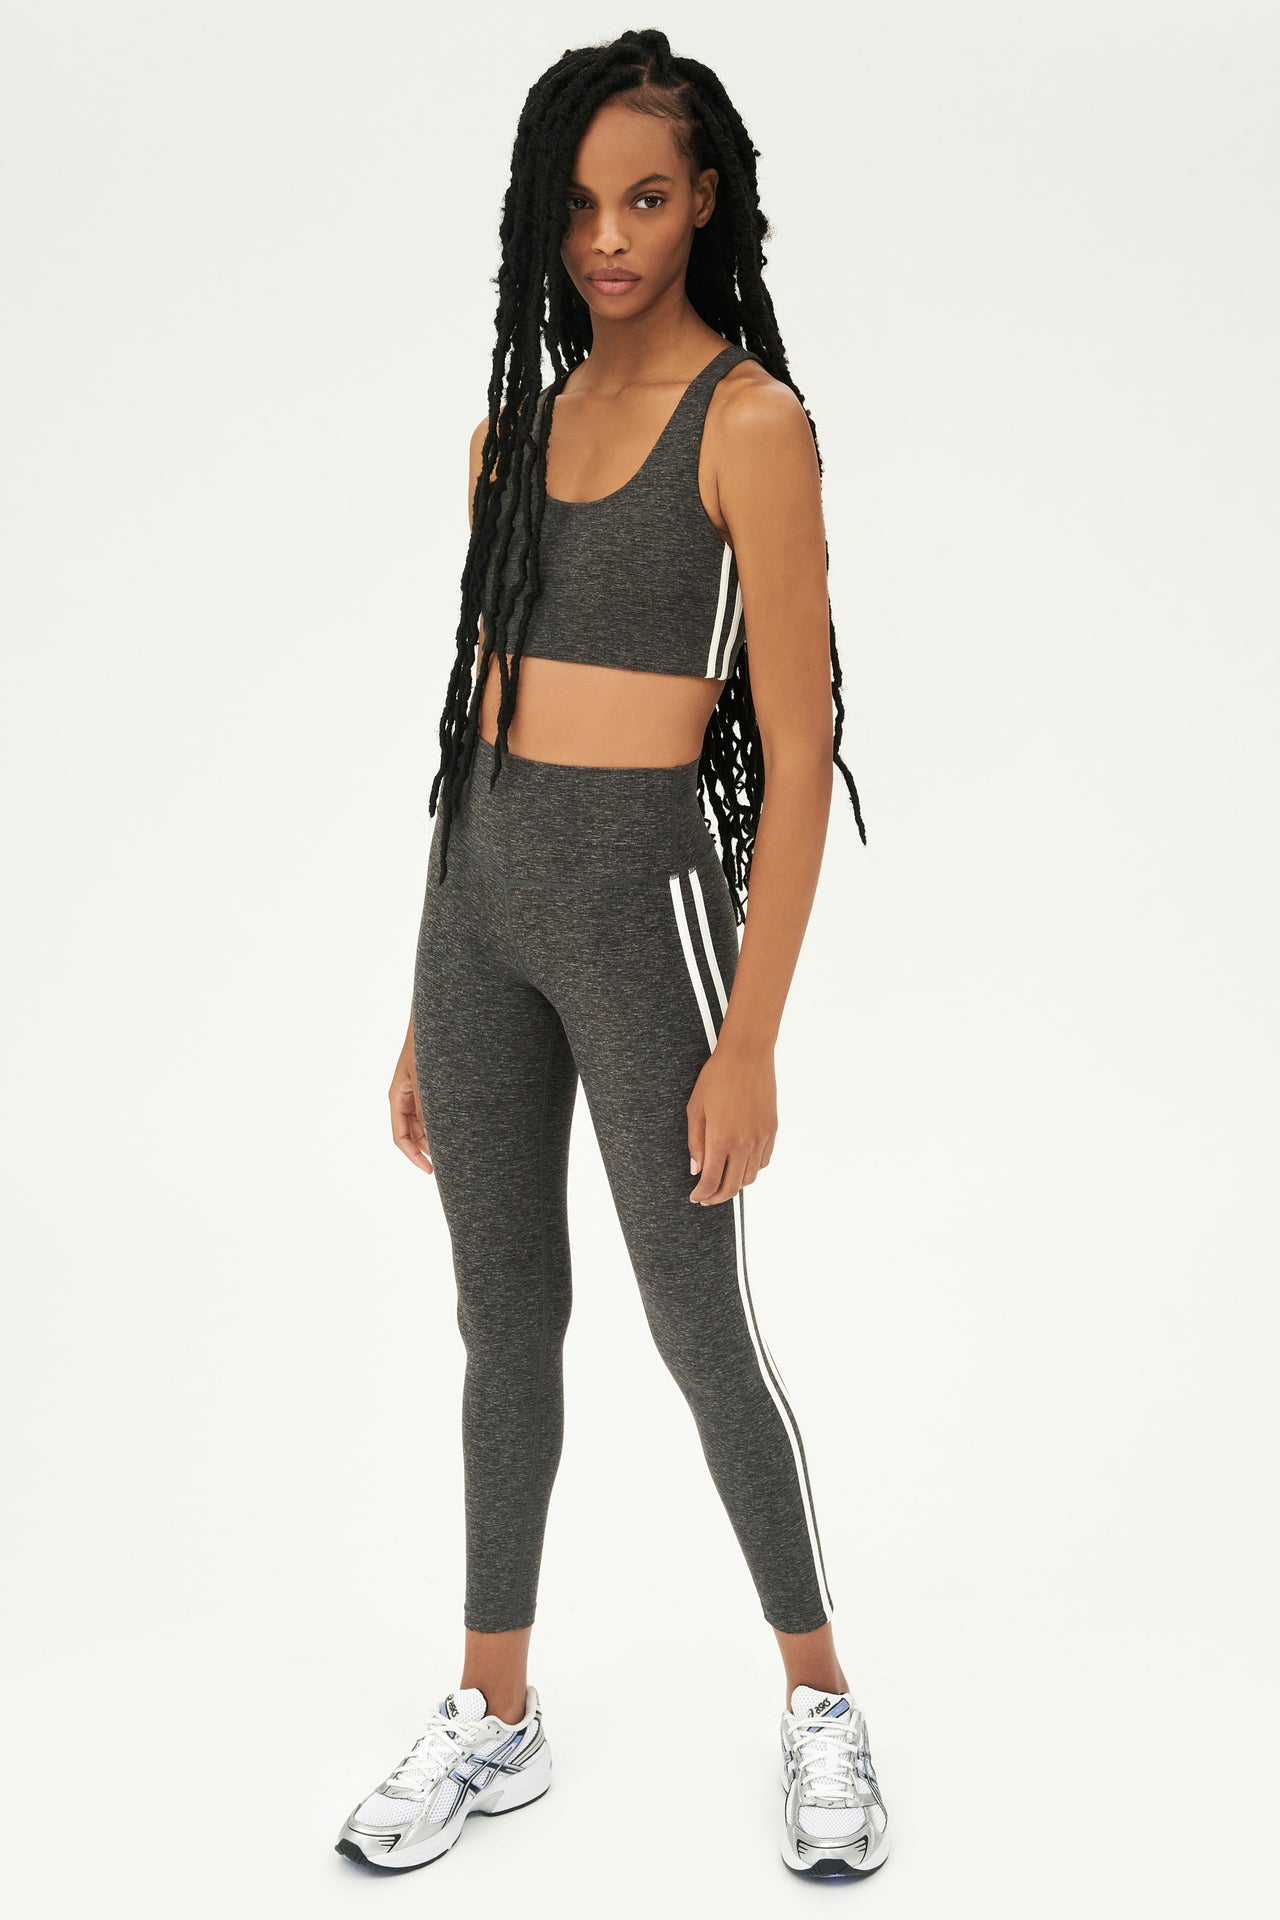 Full front view of girl wearing light dark grey sports bra with two thin white stripes down the side and light dark grey leggings with white shoes